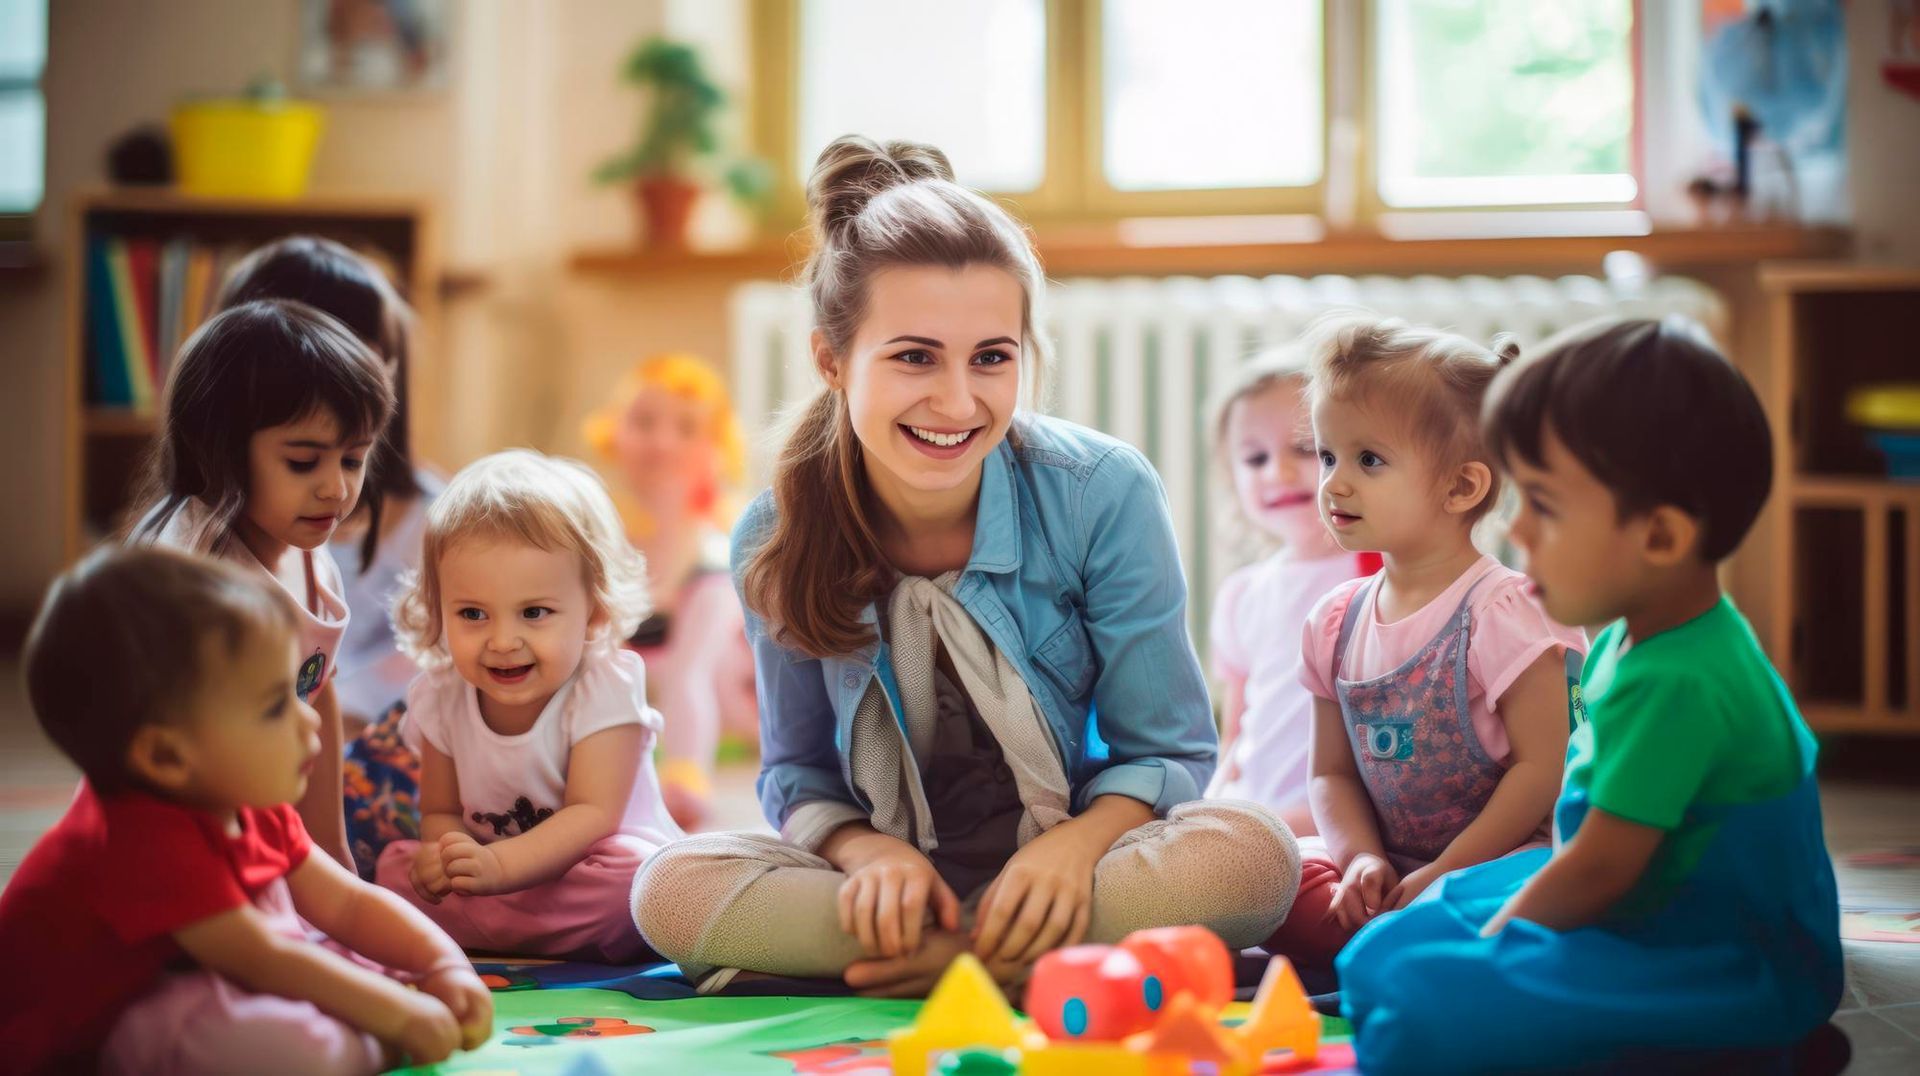 A woman is sitting on the floor with a group of children playing with toys.